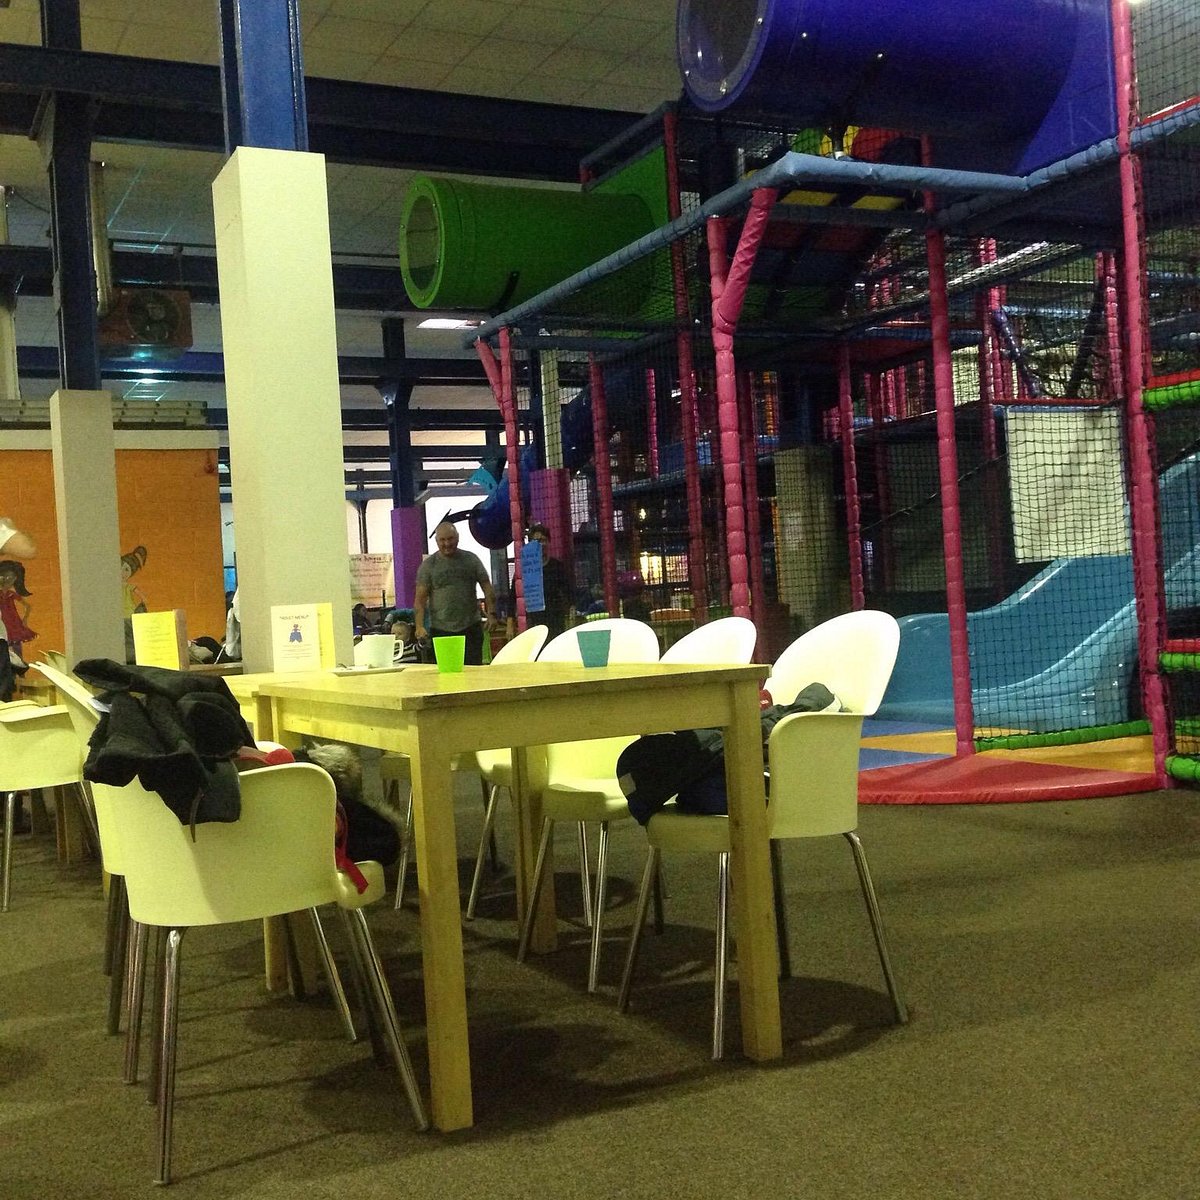 Play Sessions • Antz In Your Pantz Indoor & Soft Play Centre Altrincham